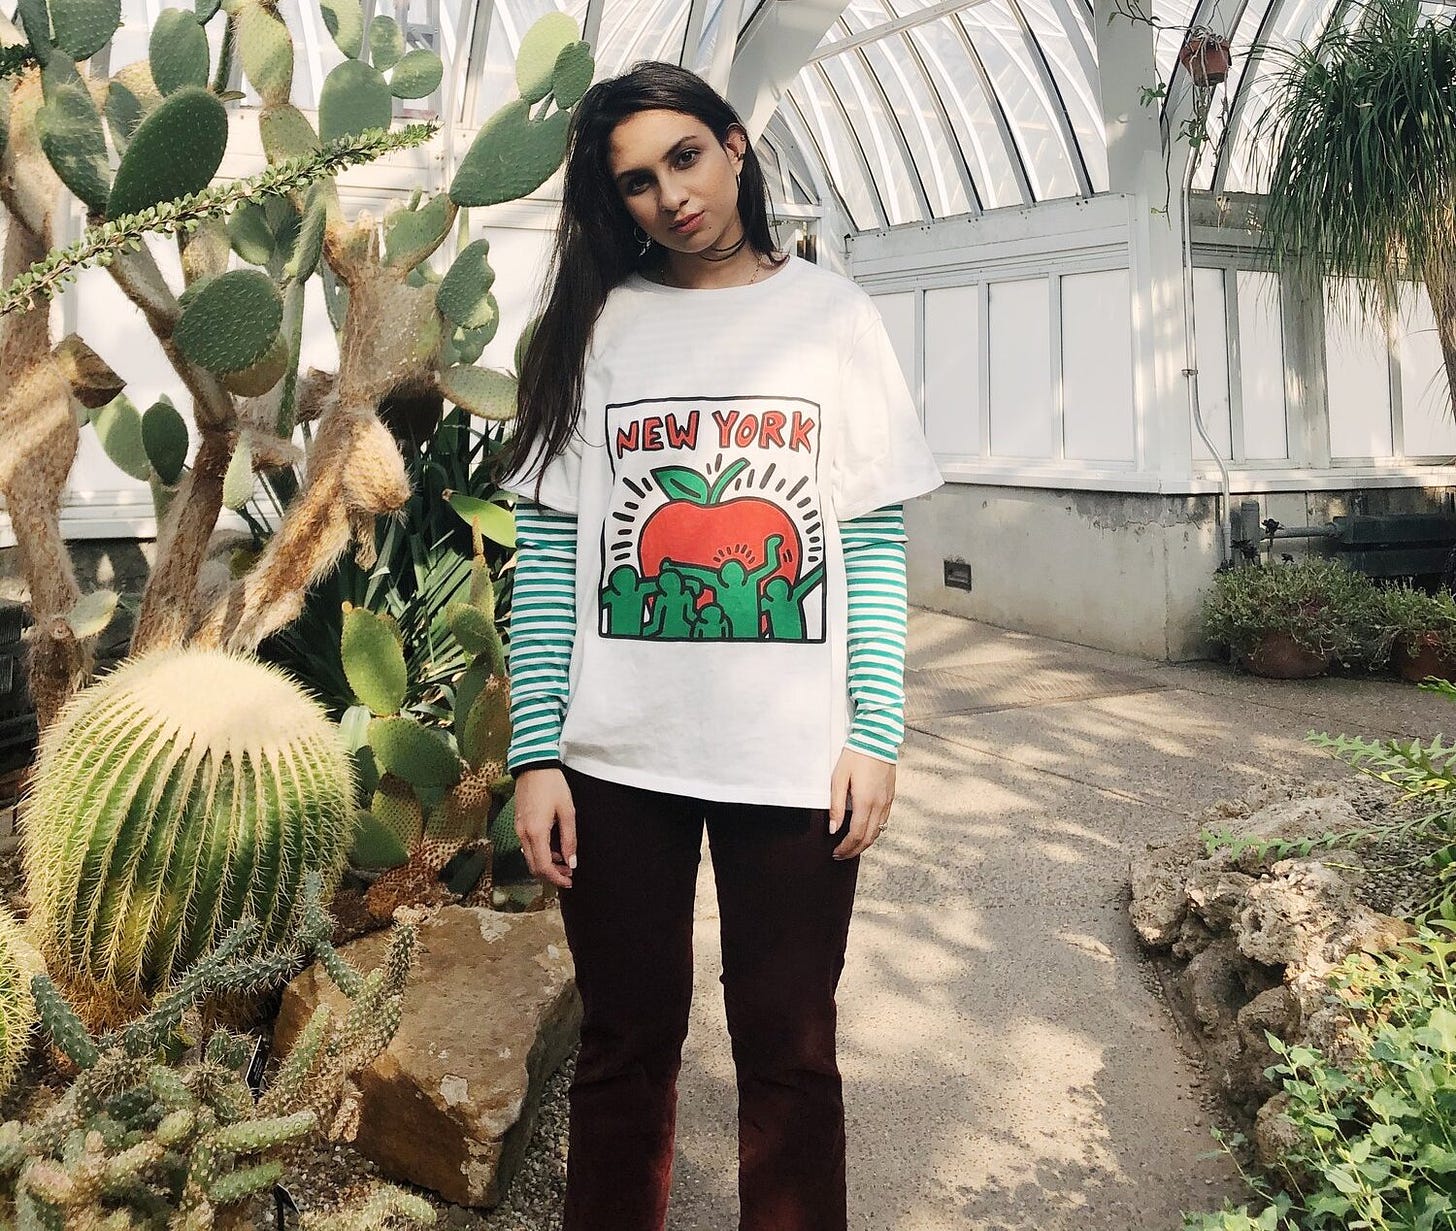 Portrait of Zaria Parvez standing in a cactus garden wearing a shirt that says "New York"